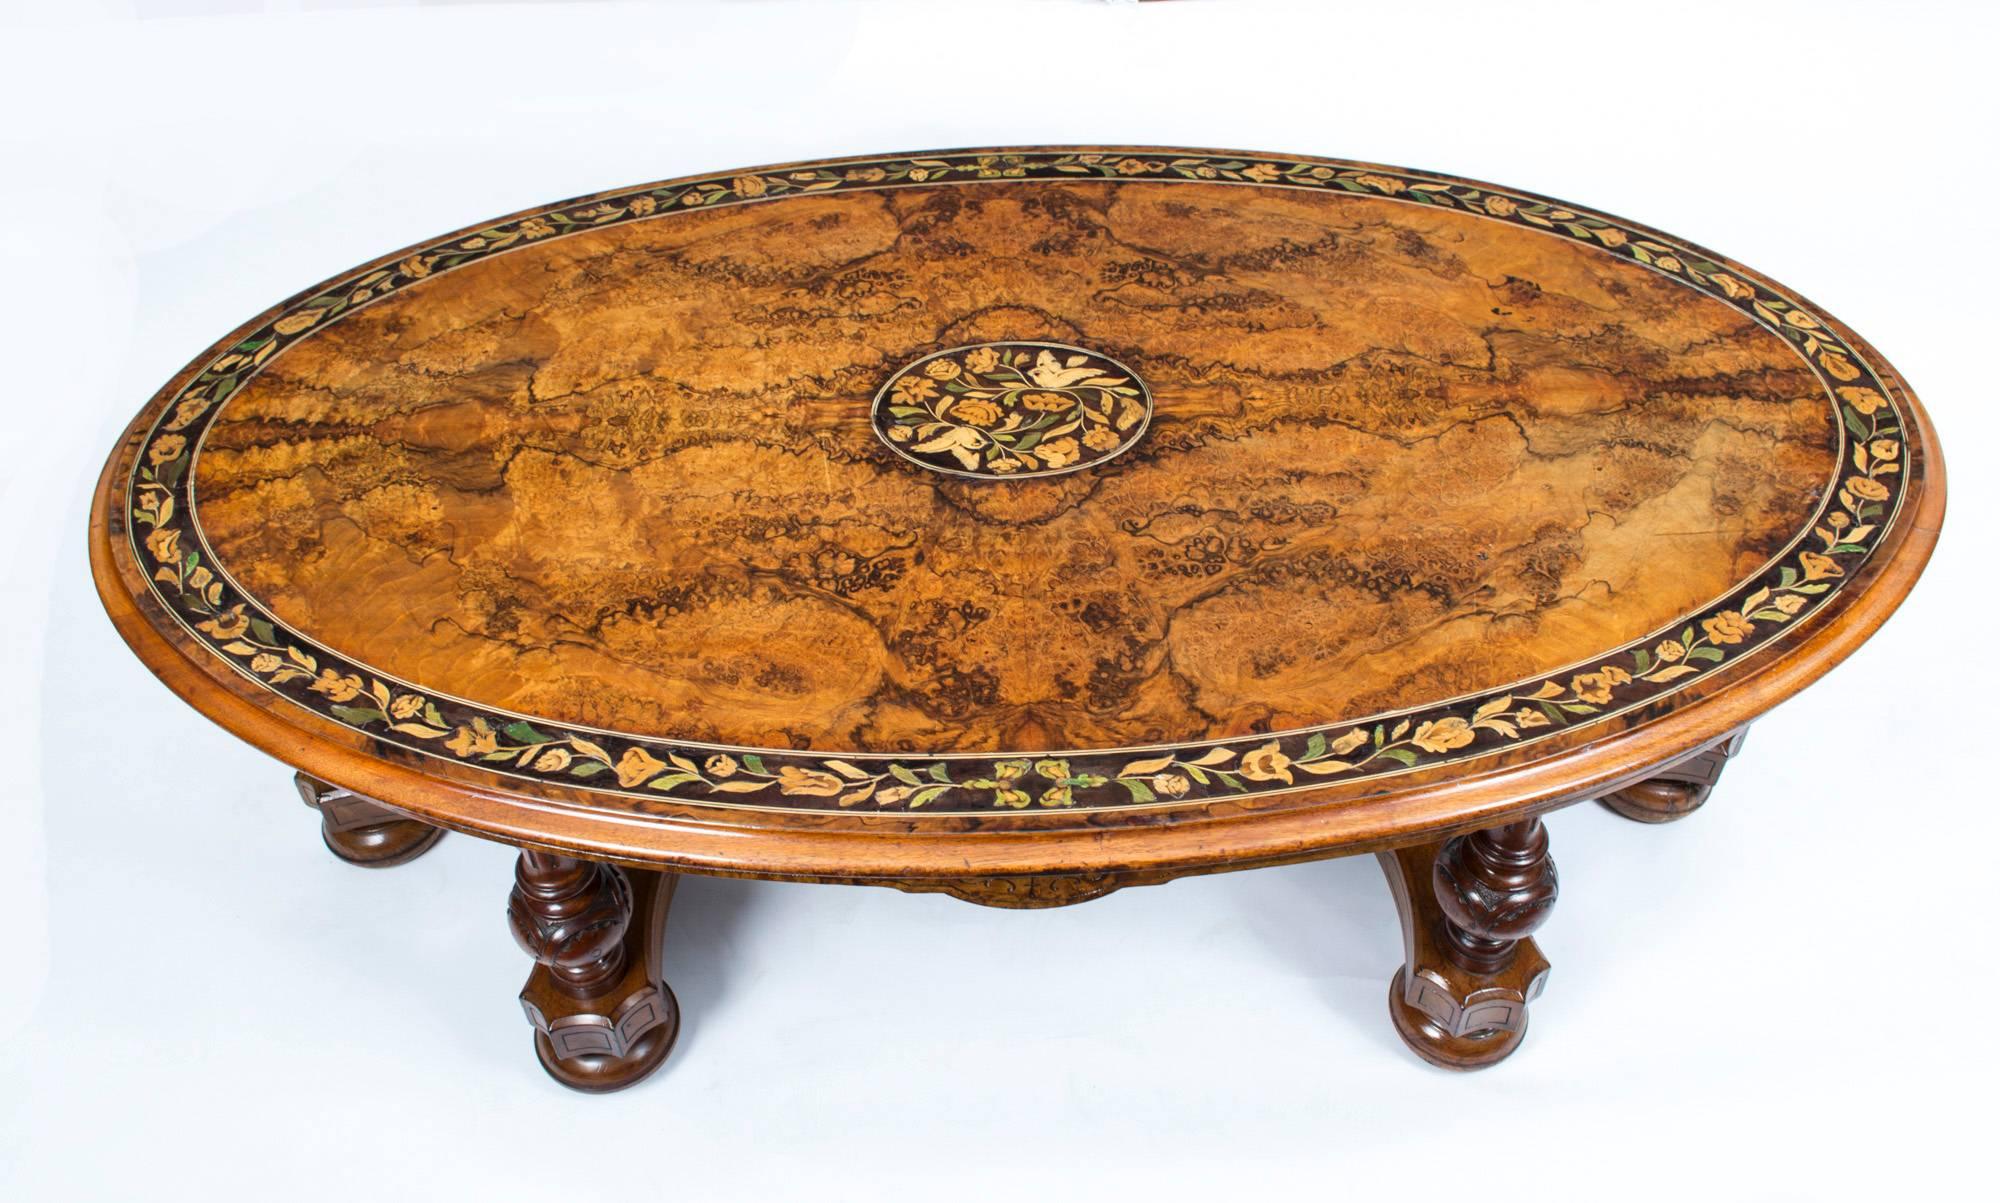 This is a superb Victorian burr walnut and marquetry oval coffee table, circa 1860 in date.

The table top is oval in shape and features wonderful burr walnut with a superb band of floral marquetry set in an ebony ground around the top with an